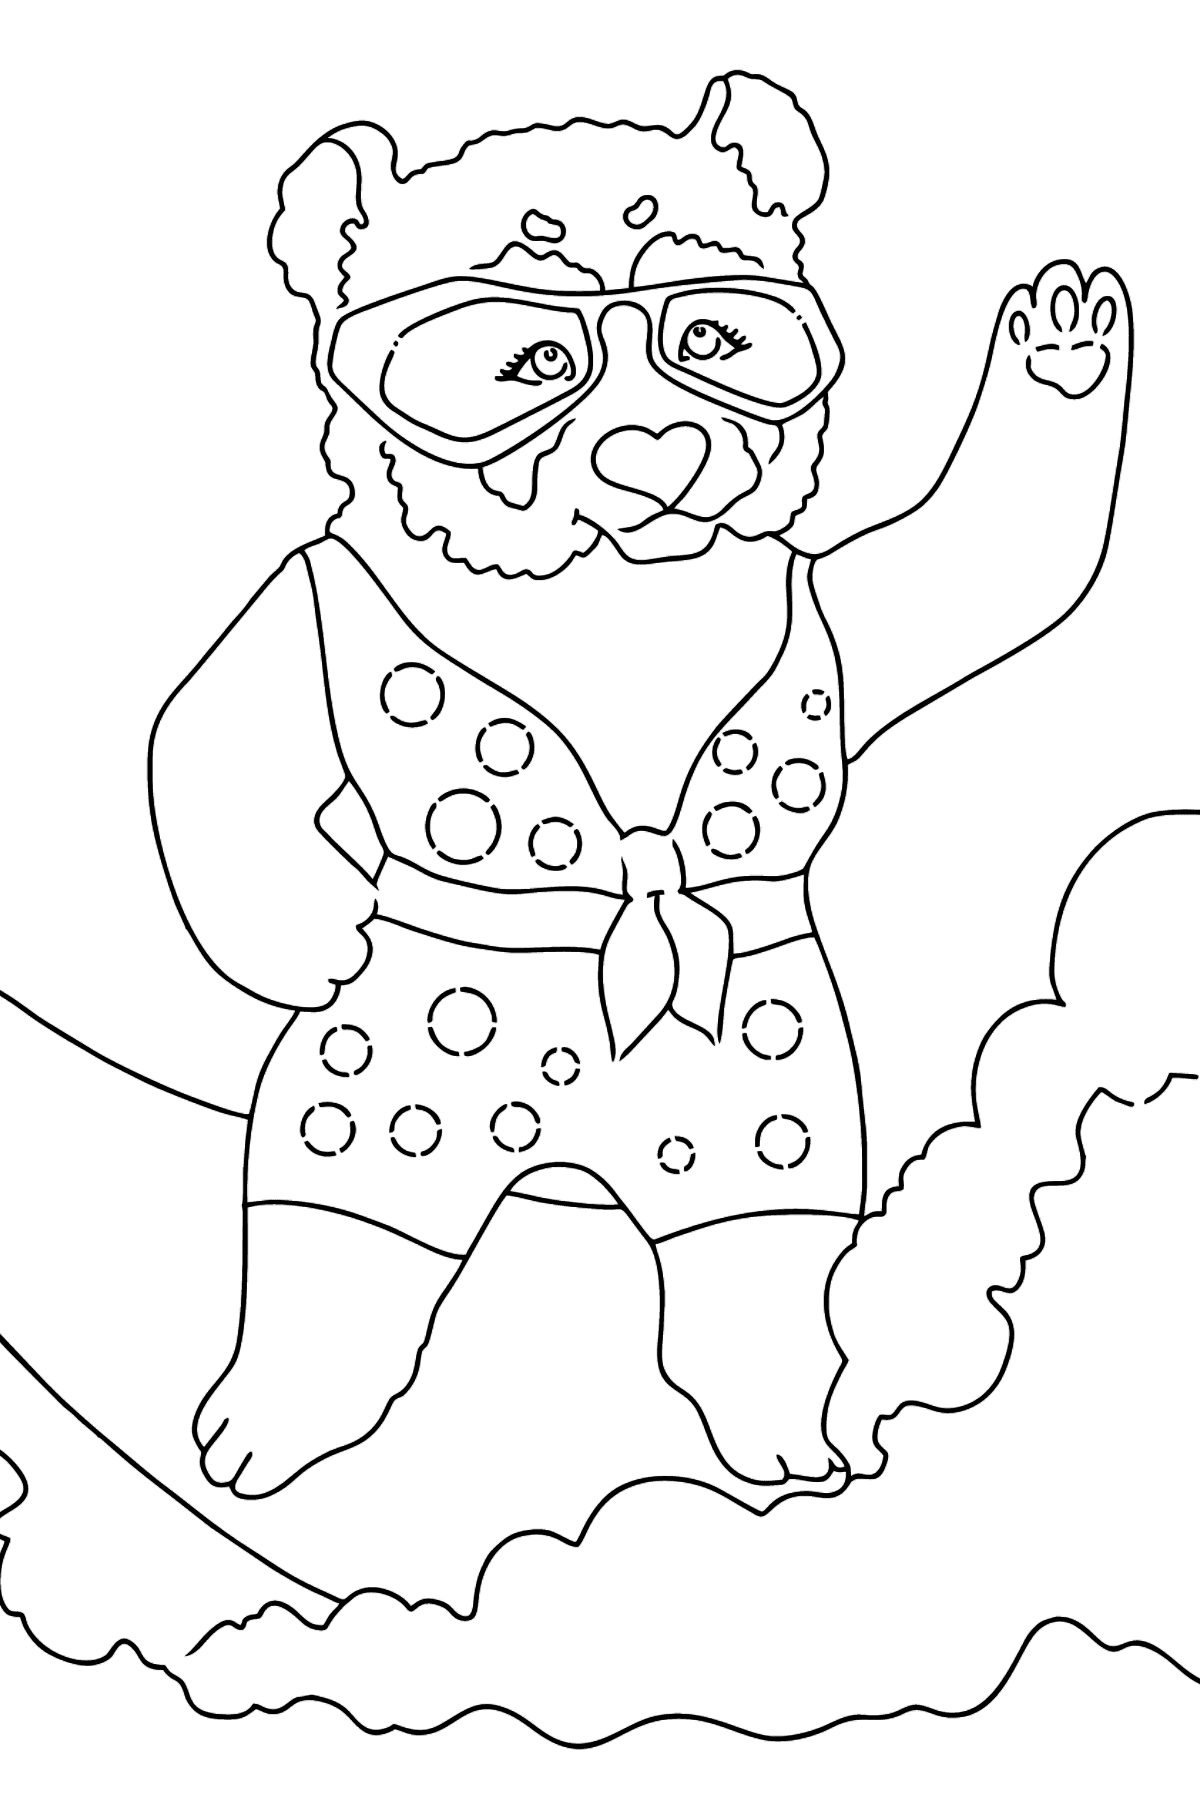 Cartoon Panda (Simple) coloring page - Coloring Pages for Kids